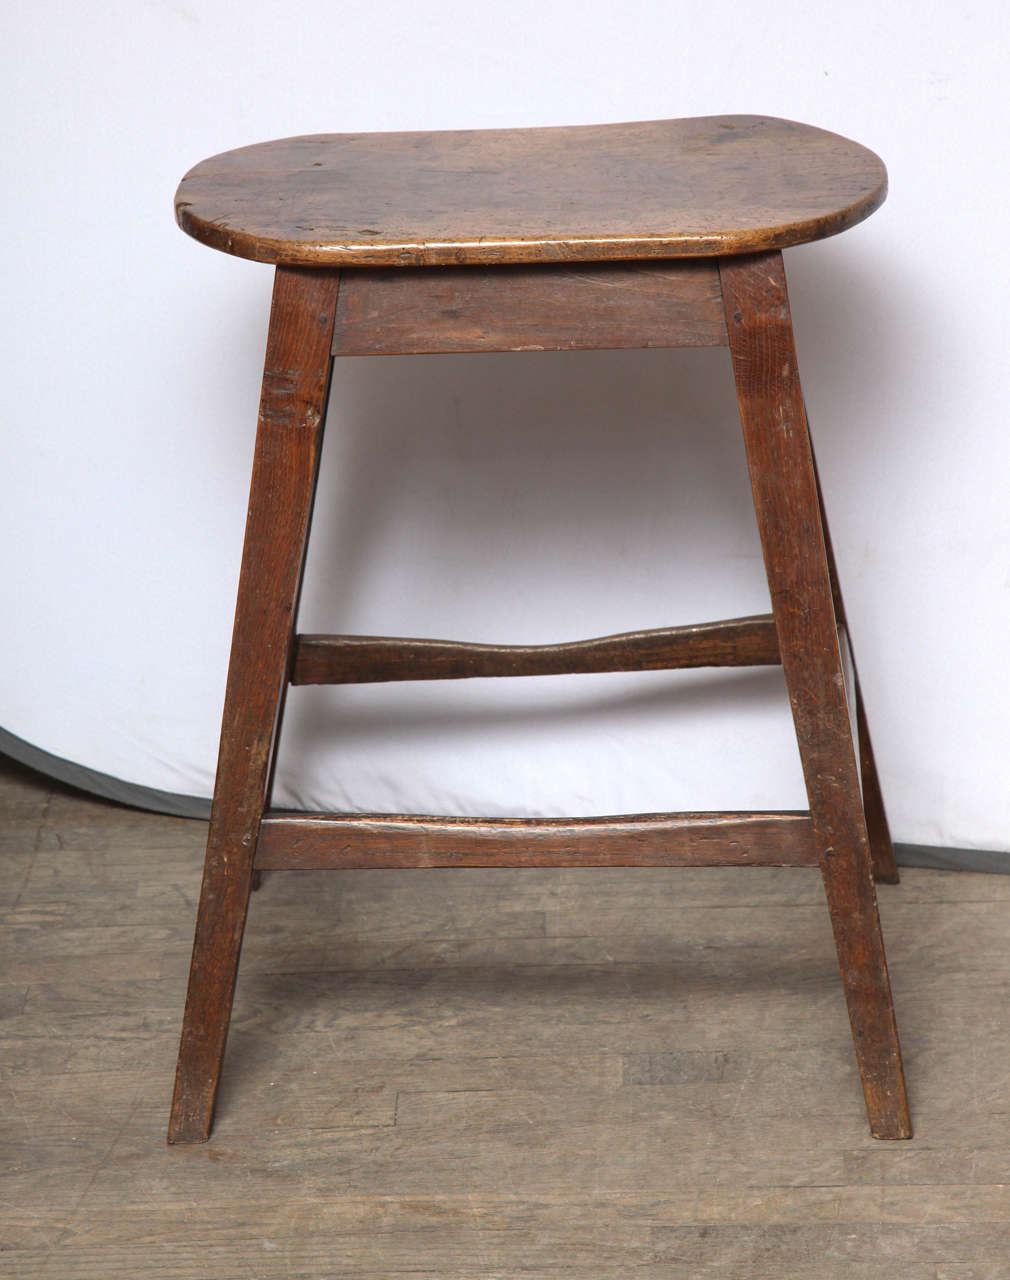 English Unusually Large Oval Kitchen Stool For Sale